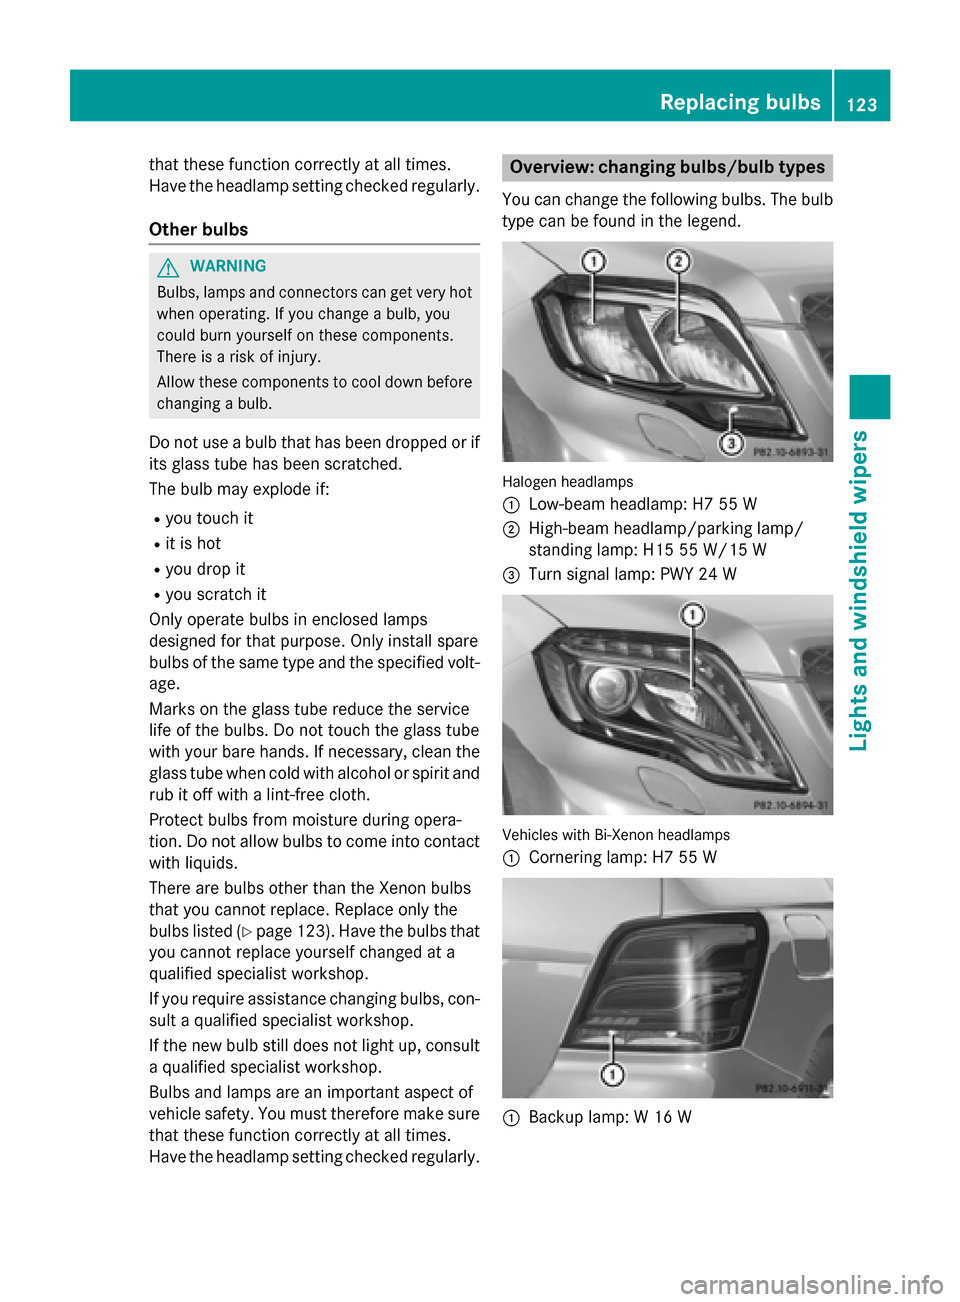 MERCEDES-BENZ GLK-Class 2015 X204 Owners Manual that these function correctly at all times.
Have the headlamp setting checked regularly.
Other bulbs G
WARNING
Bulbs, lamps and connectors can get very hot when operating. If you change a bulb, you
co